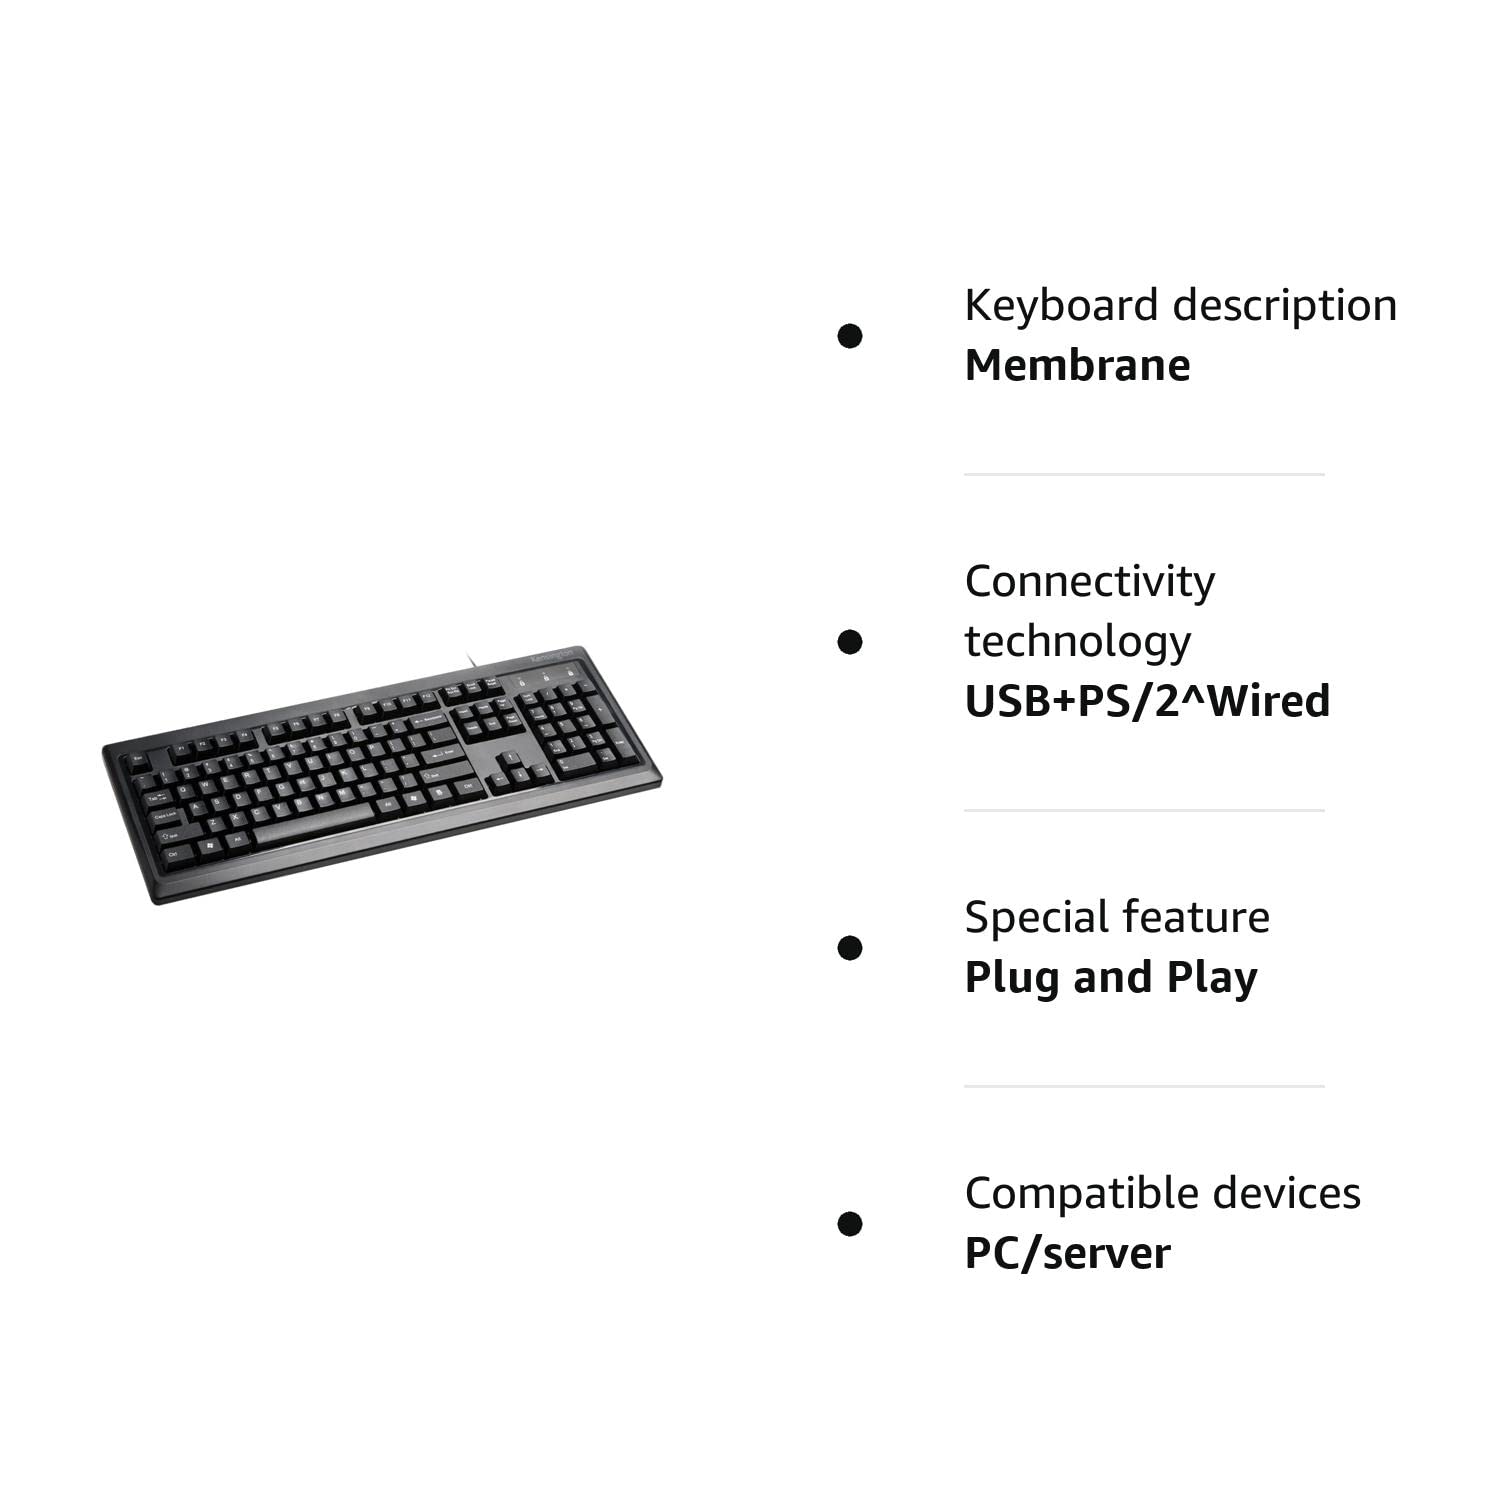 Kensington- wired keyboard for PC, Laptop, Desktop, Computer, notebook. USB Keyboard compatible with Dell, Acer, HP, Samsung and more, with UK layout - Black (1500109)